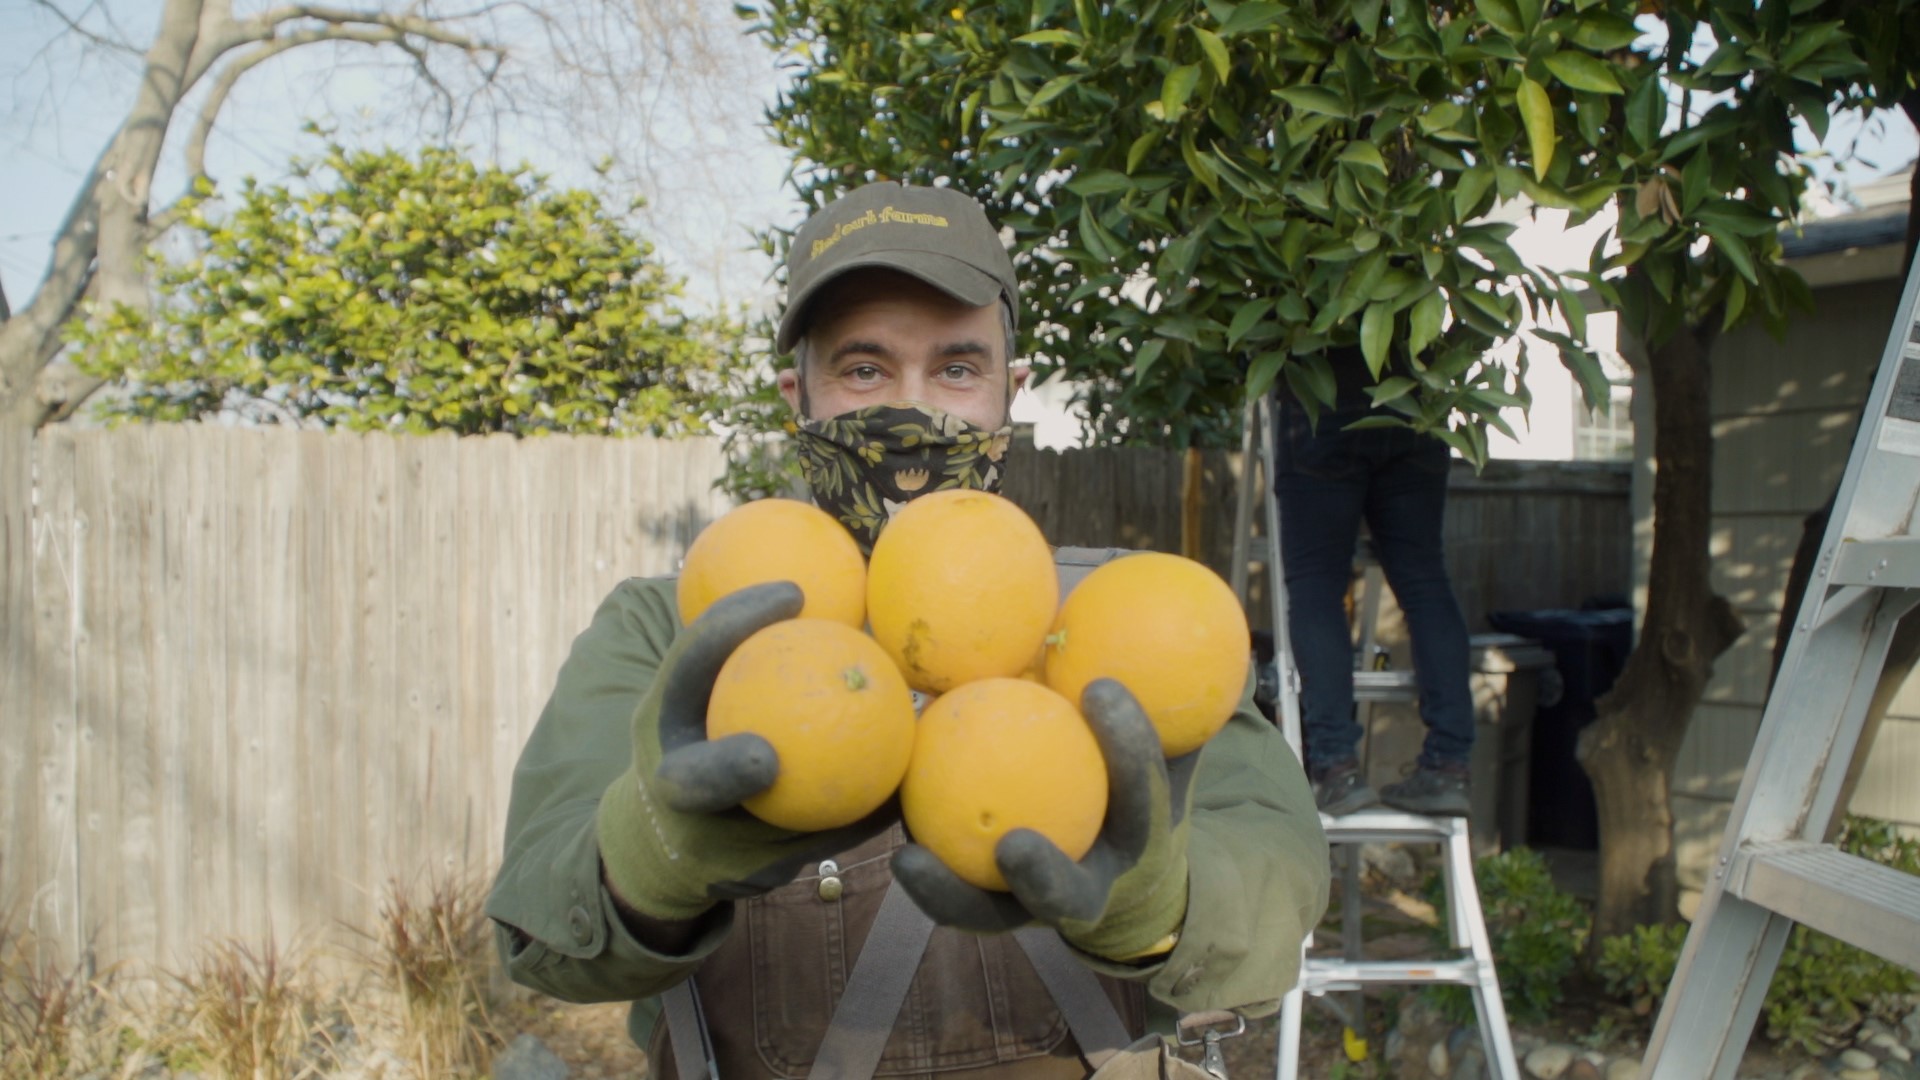 When the fruit is ripe in Sacramento, Matt Ampersand prepares for harvest. The yield he’s after isn’t in a field. It’s in his neighborhood’s backyard.